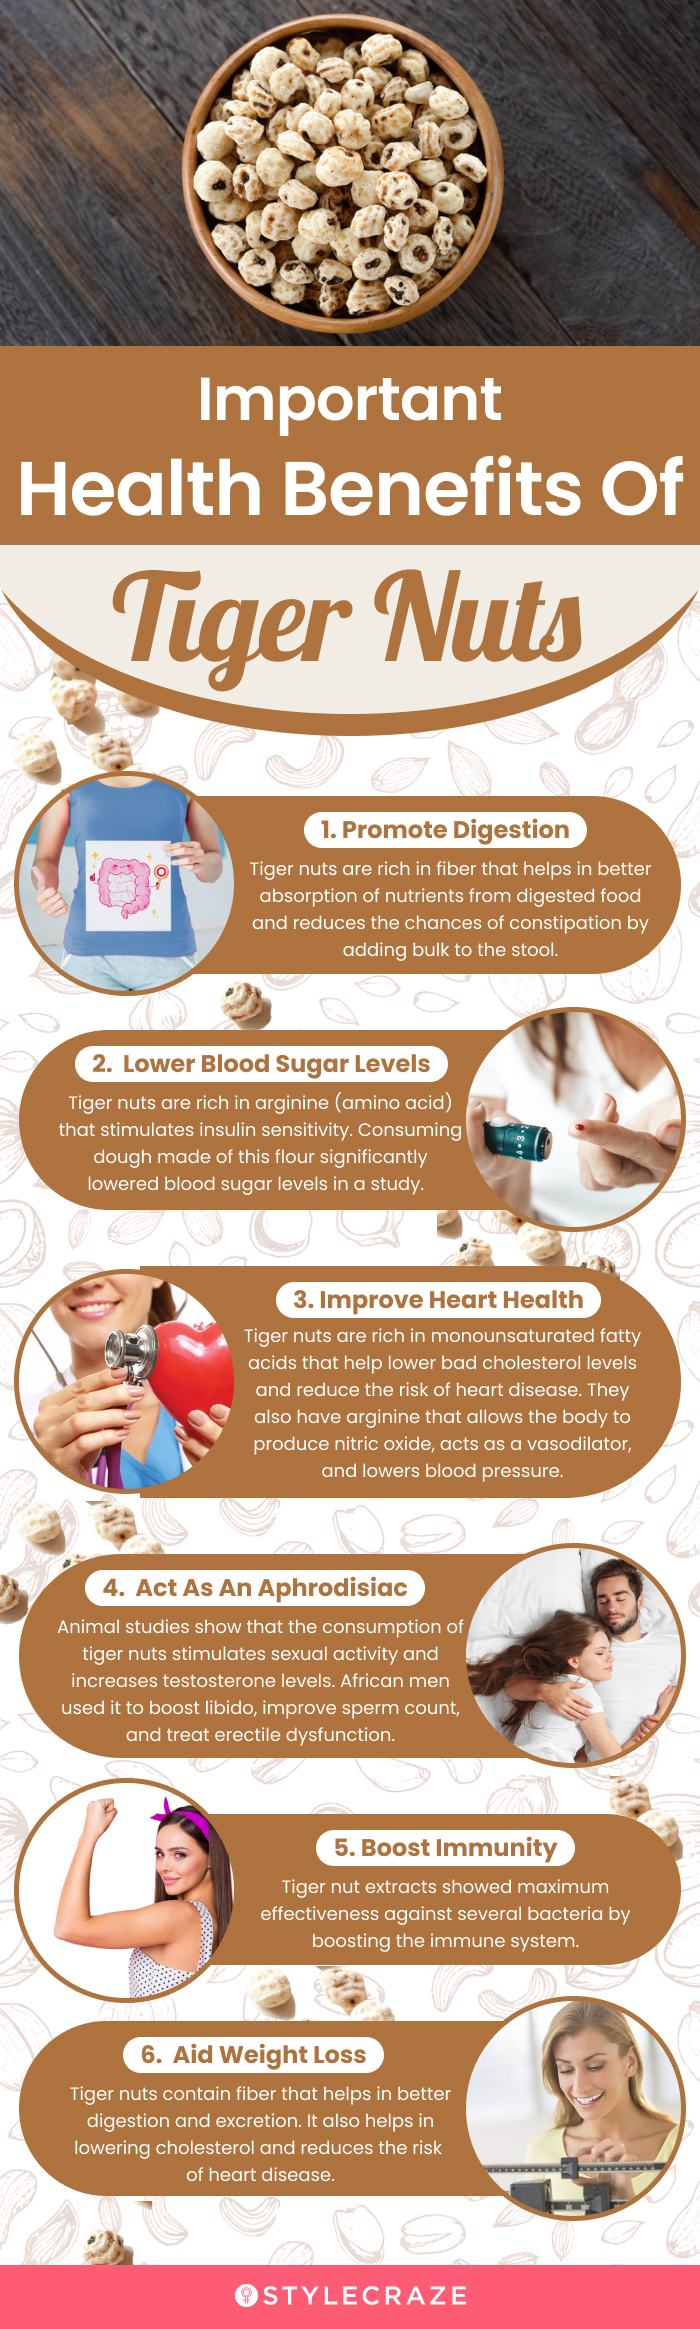 important health benefits of tiger nuts (infographic)